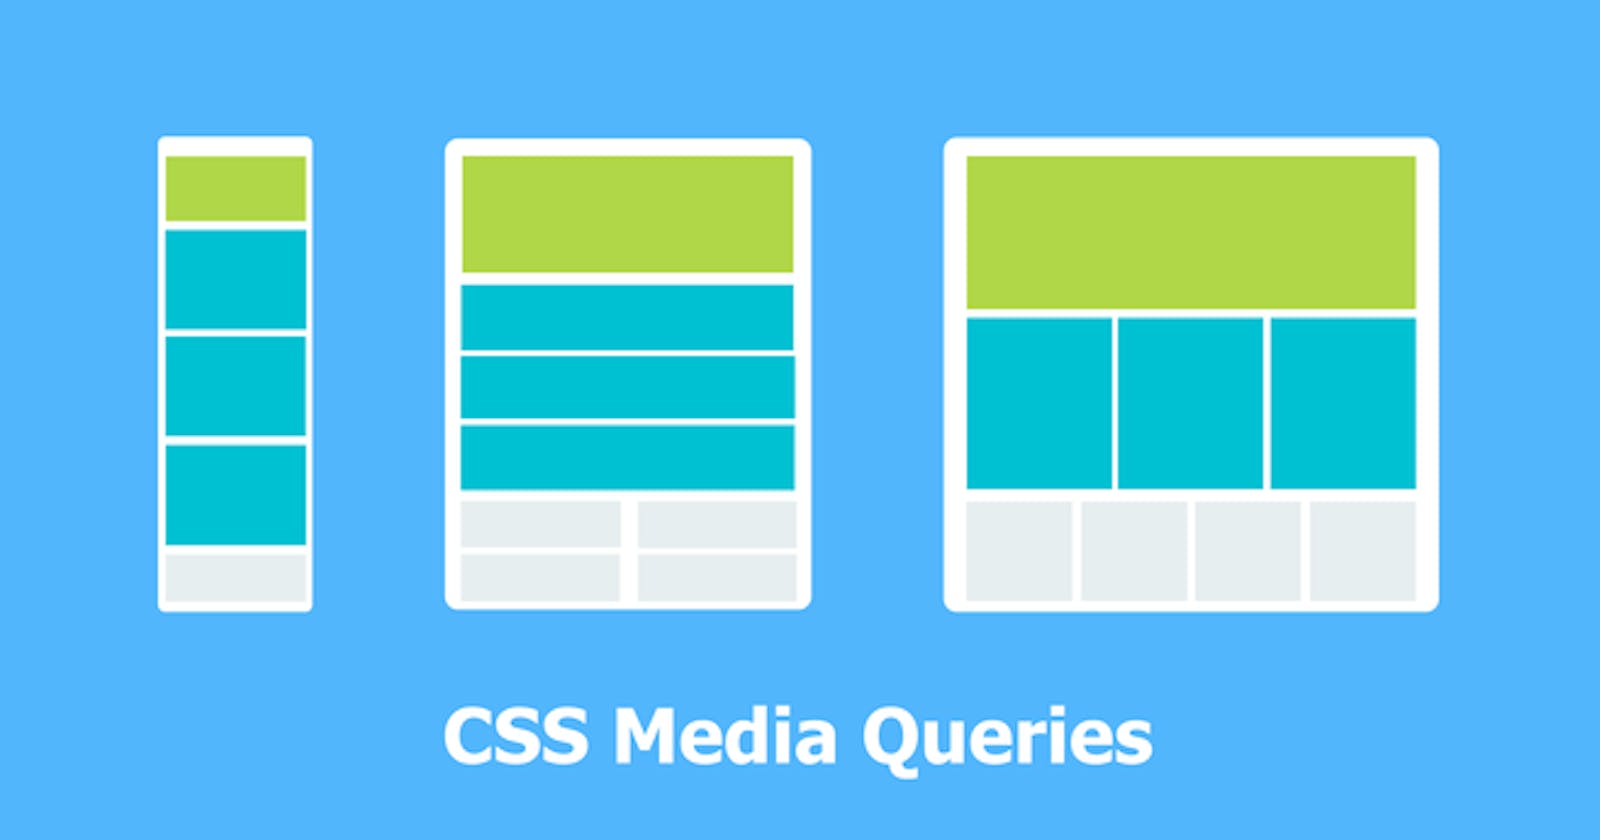 My way to implement media queries using SCSS mixins